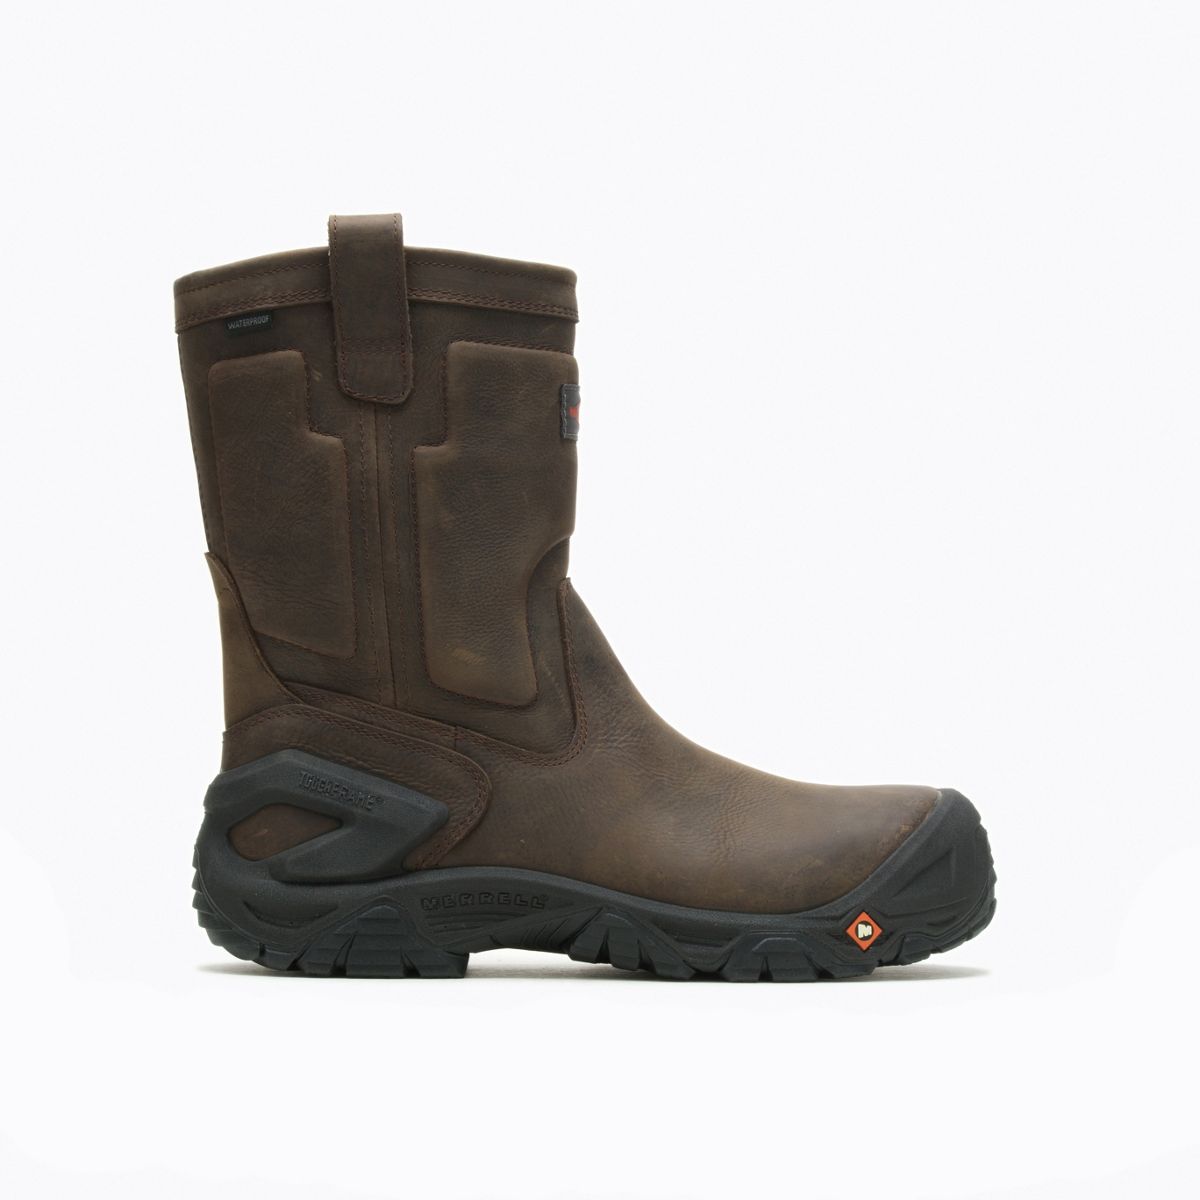 Men's Strongfield Leather Waterproof Safety Boots | Merrell